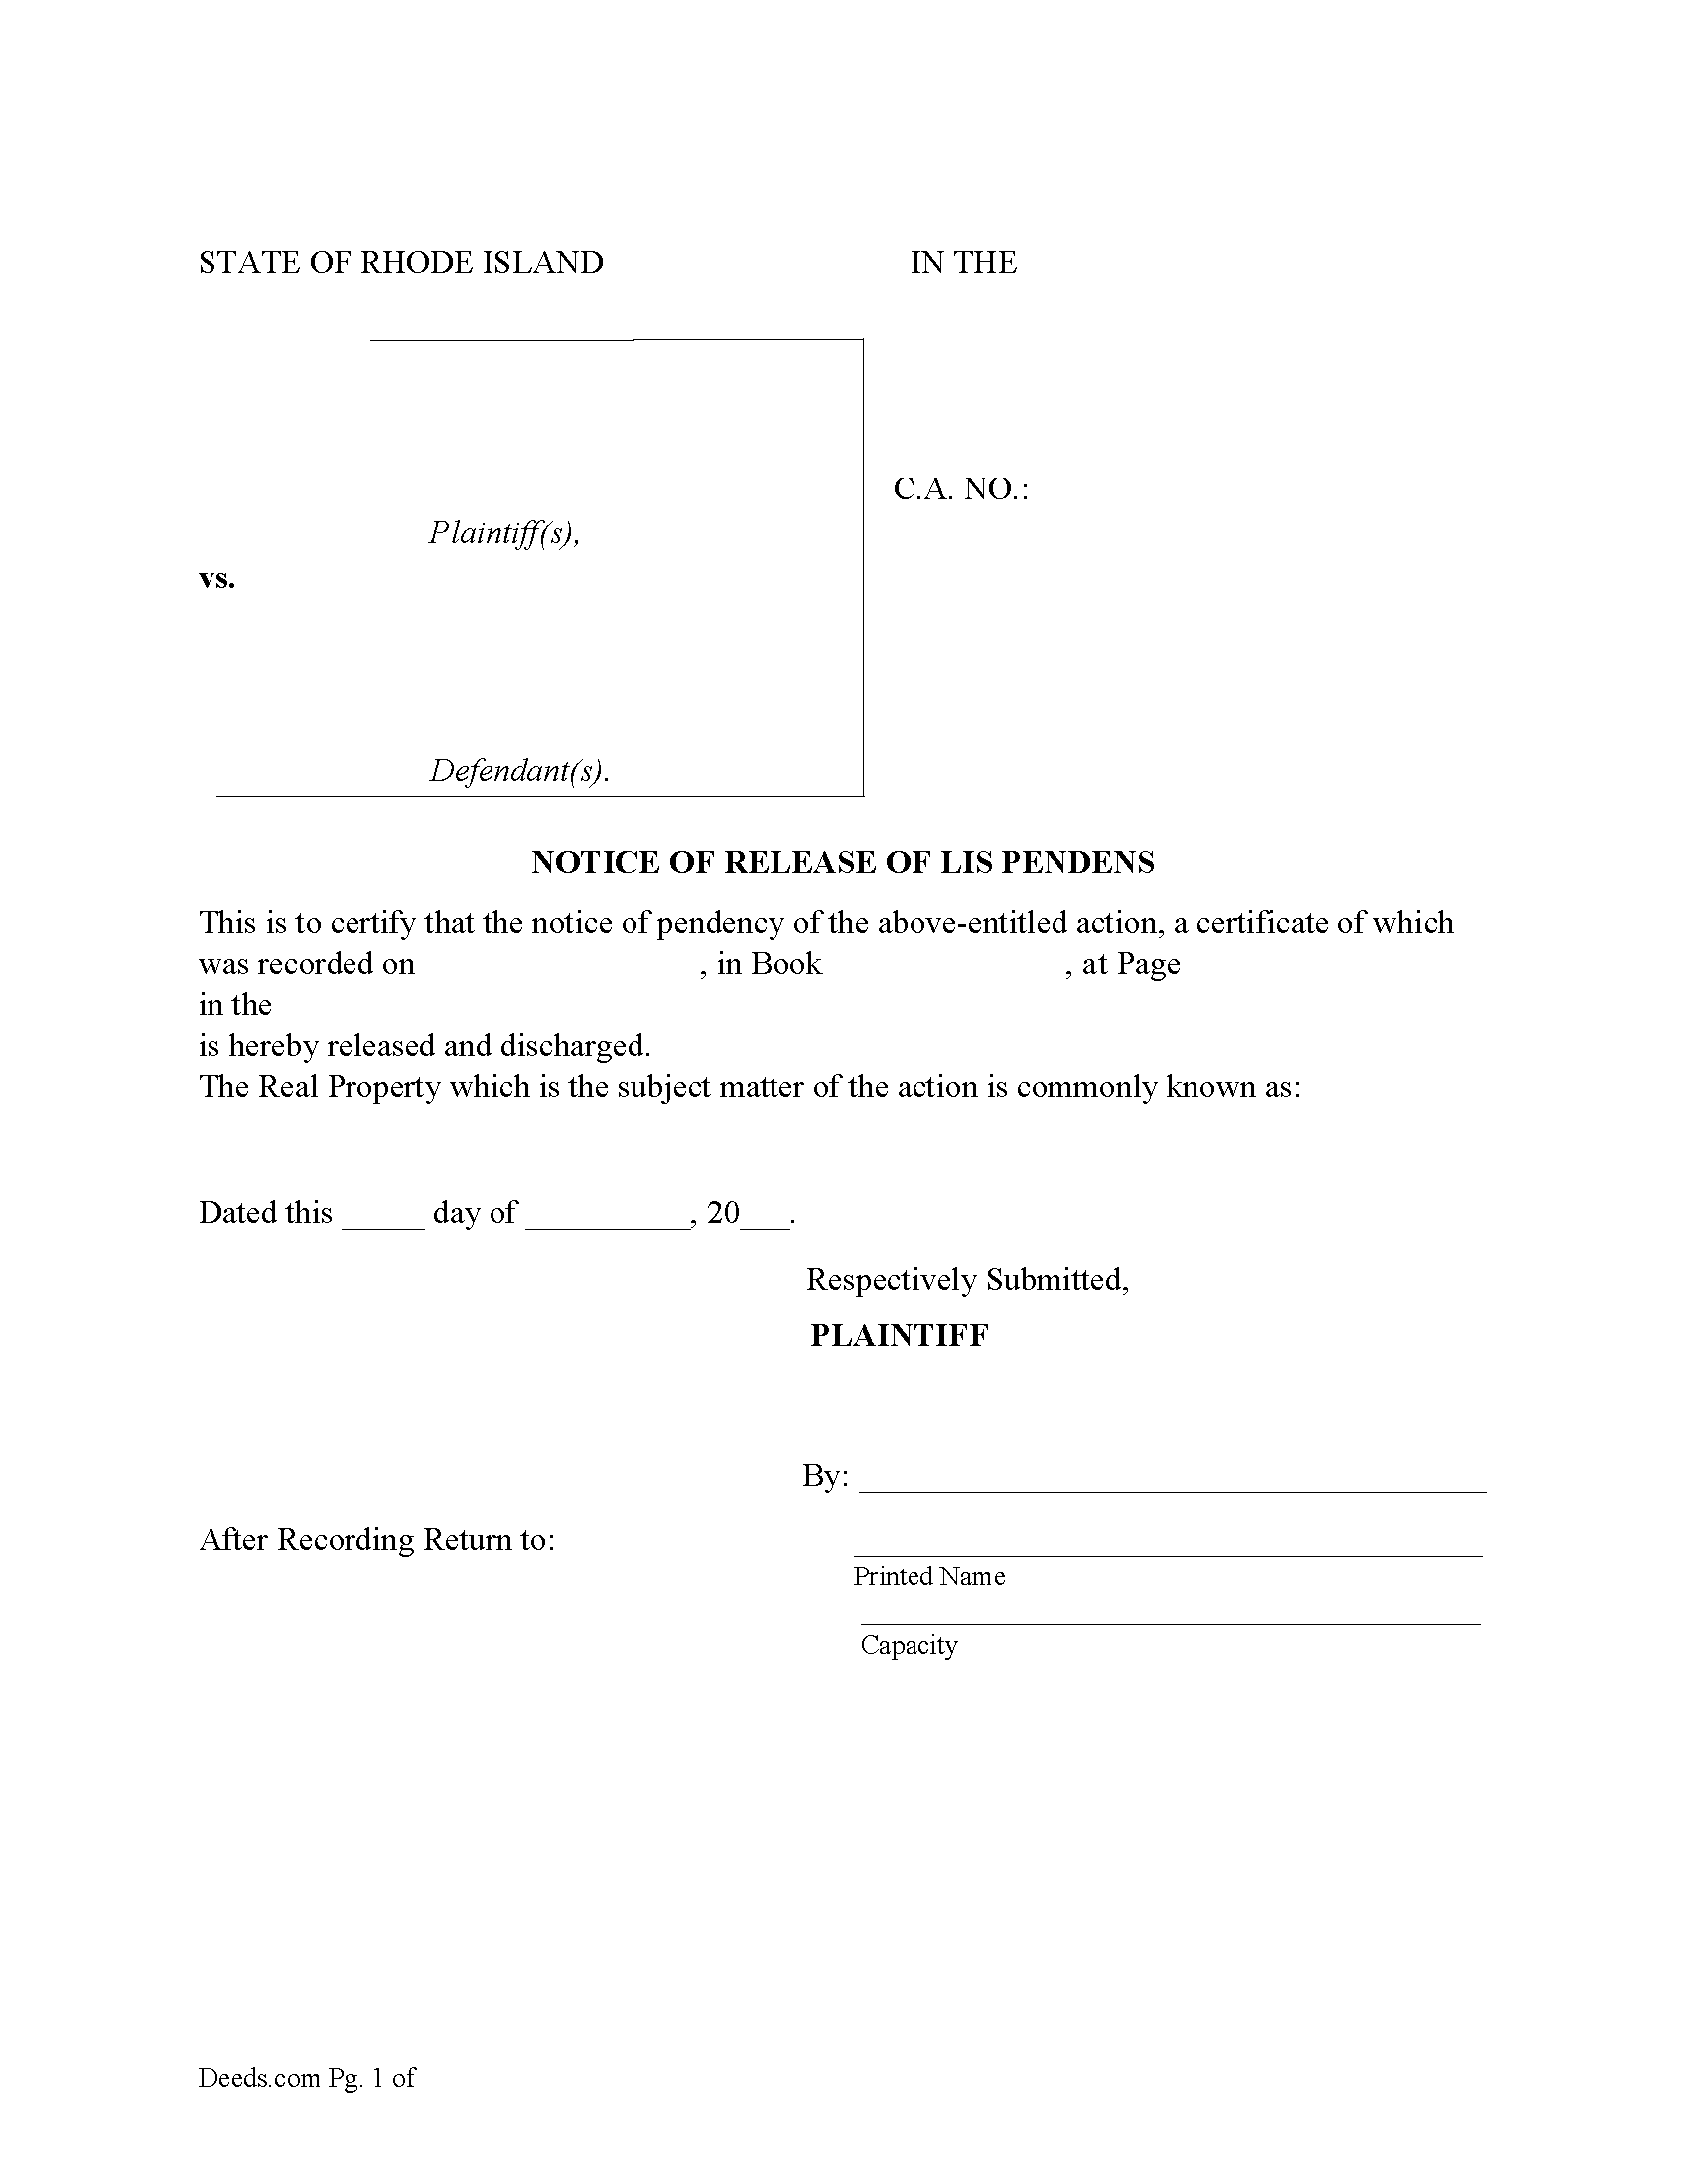 Notice of Release of Lis Pendens Form